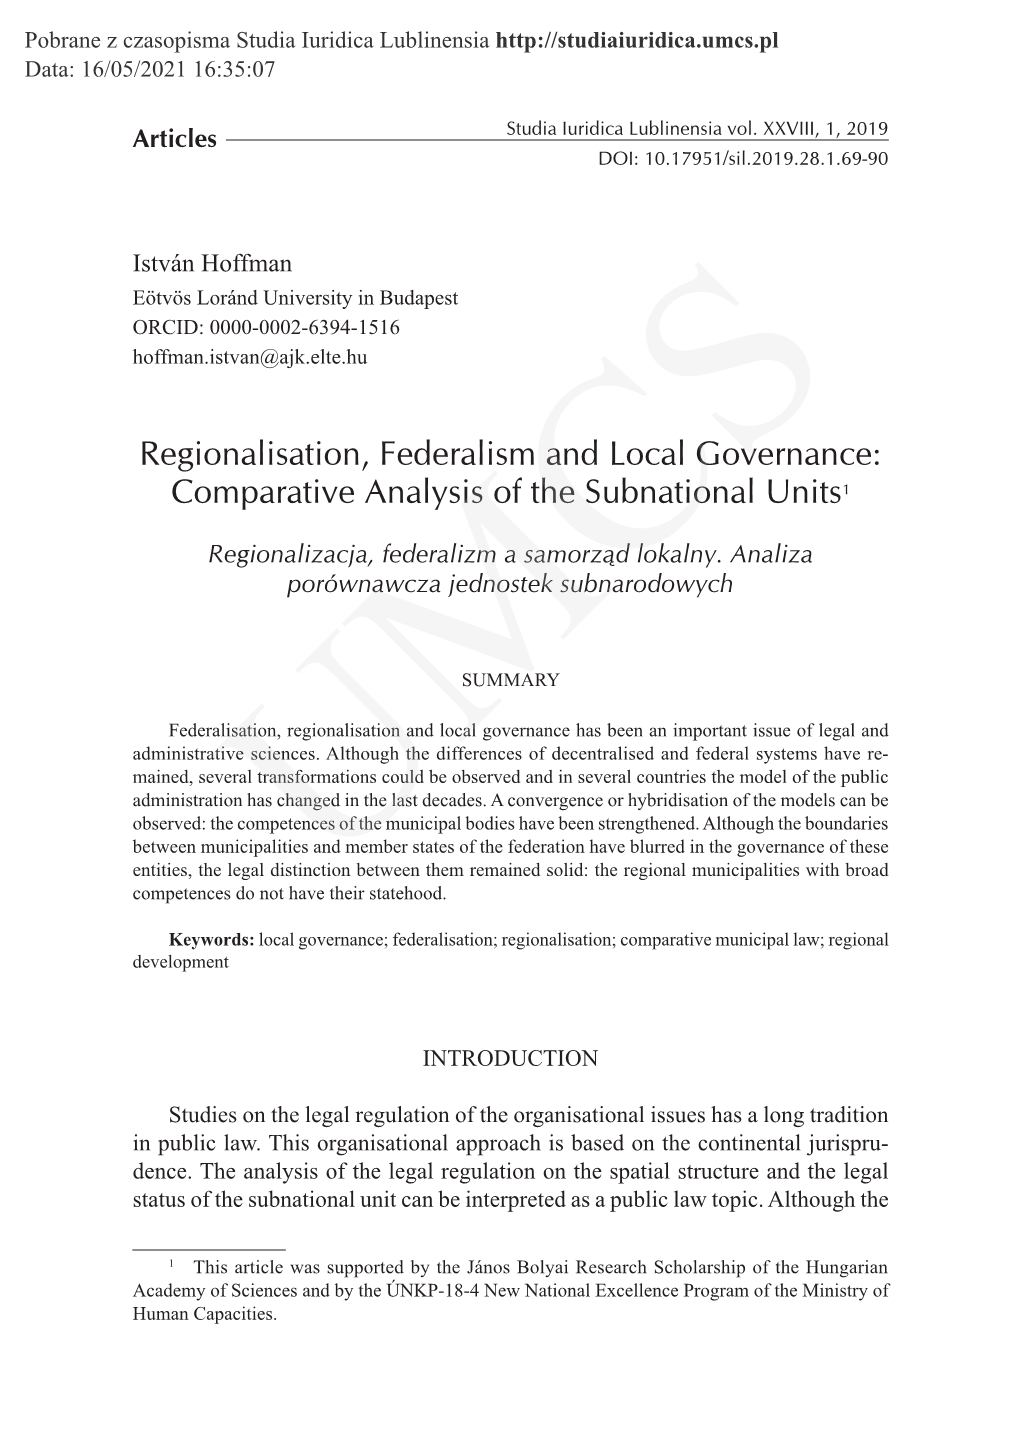 Regionalisation, Federalism and Local Governance: Comparative Analysis of the Subnational Units1